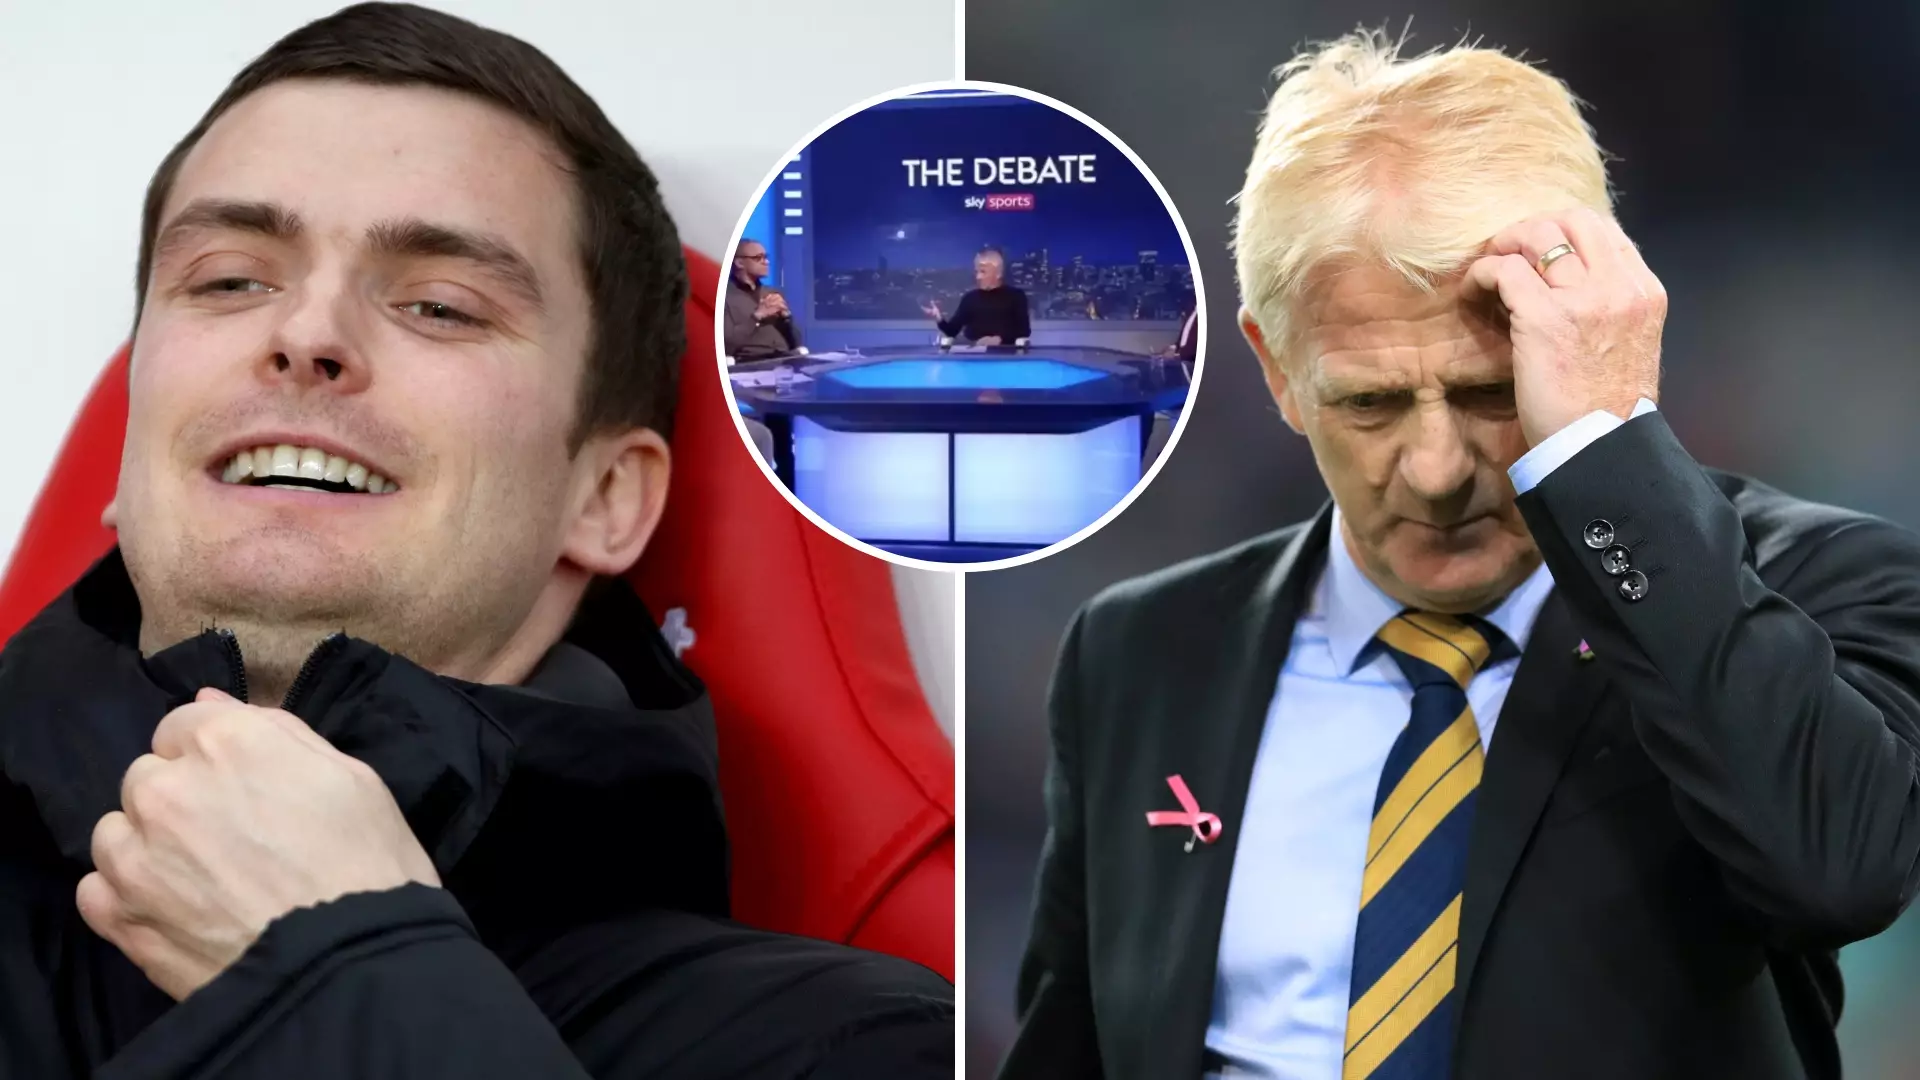 Gordon Strachan Won't Feature On Sky Sports After Comments Made On Adam Johnson